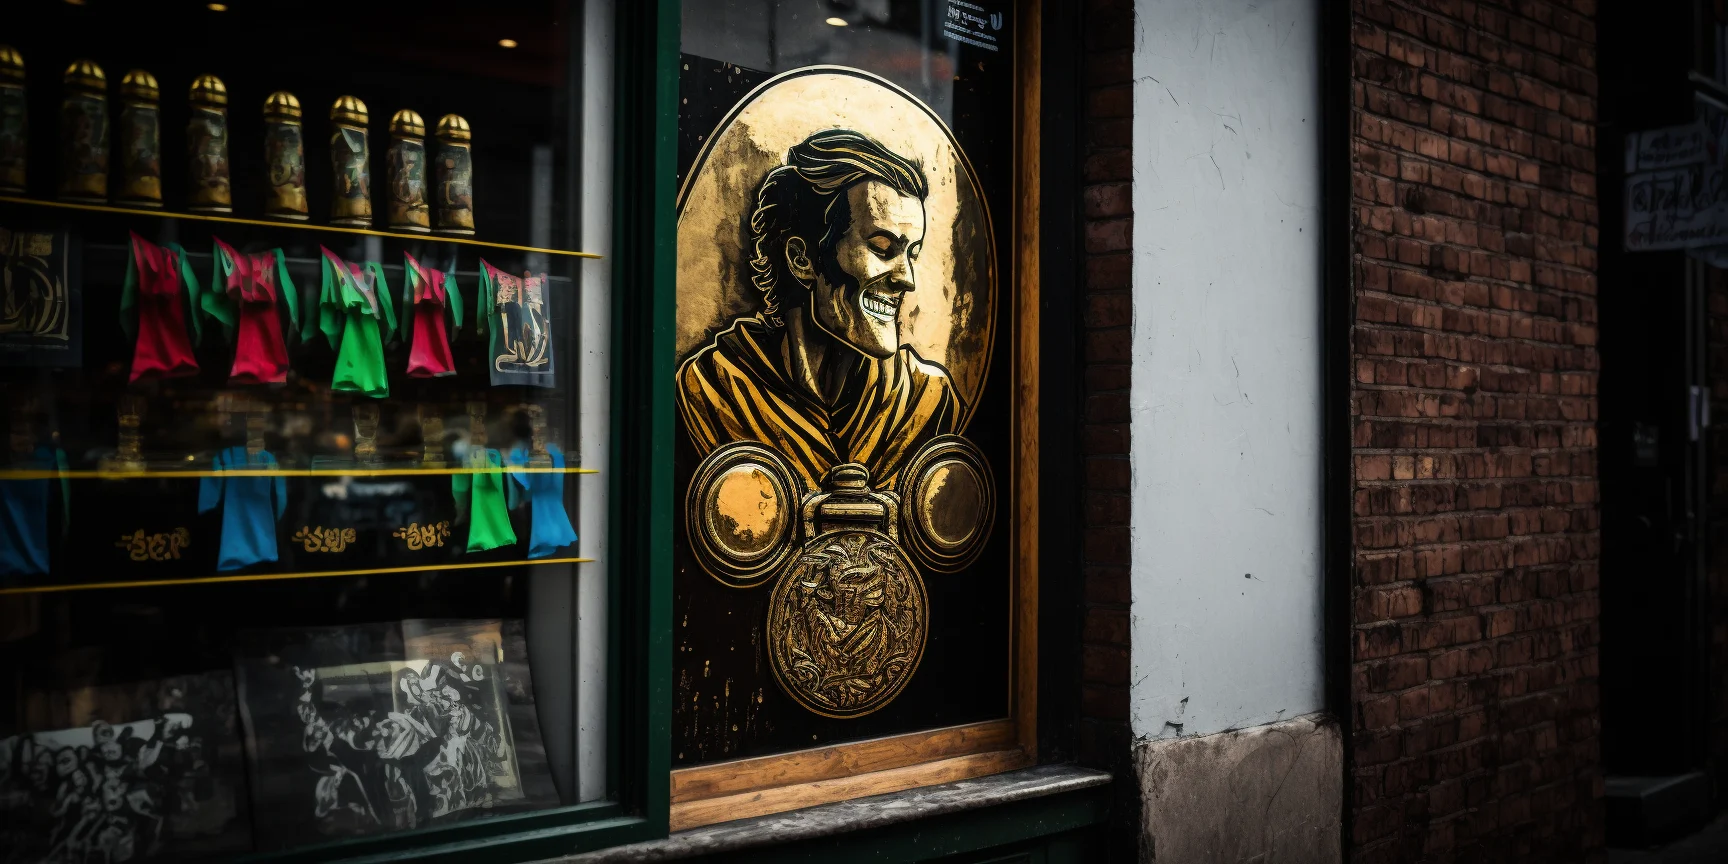 A shop window and medal graffiti on the wall